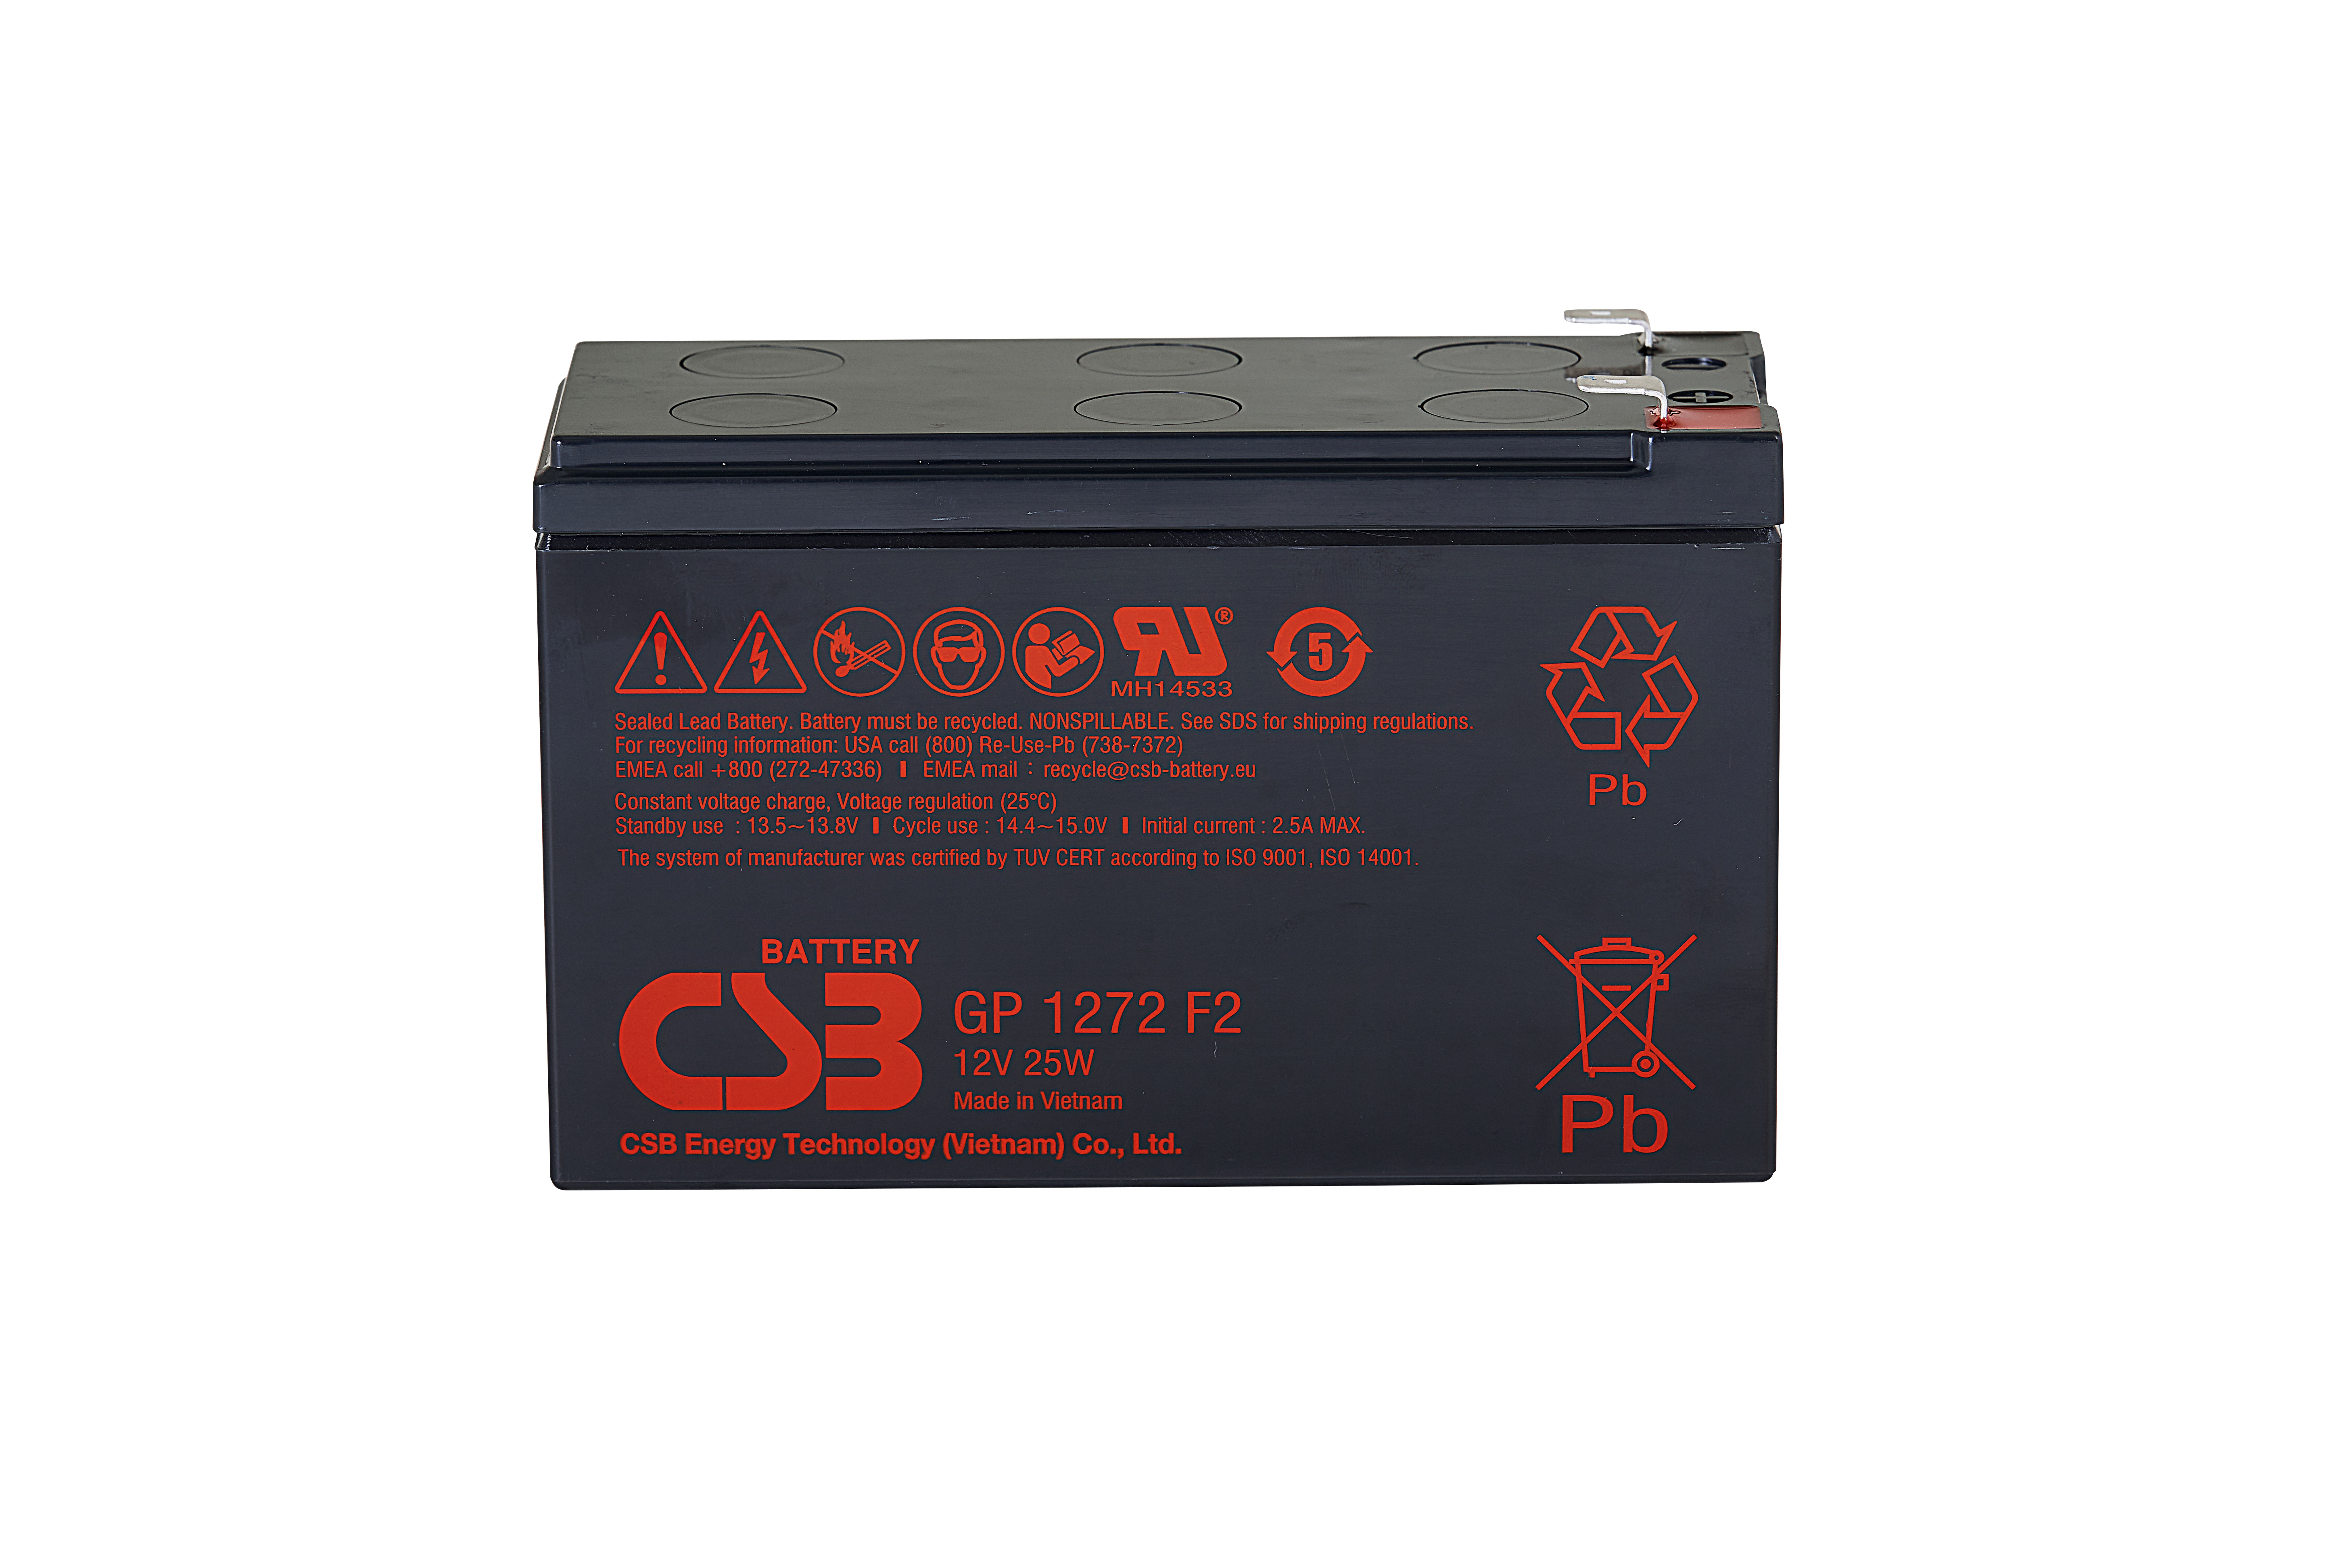 Battery CSB series GP, GP1272 F2, voltage 12V, capacity 7.2Ah (discharge 20 hours), max. discharge current (5 sec.) 130A, short circuit current 304A, max. charge current 2.8A, lead-acid type AGM, terminals F2, LxWxH 150.9x64.8x98.6mm., weight 2.4kg., service life 5 years.